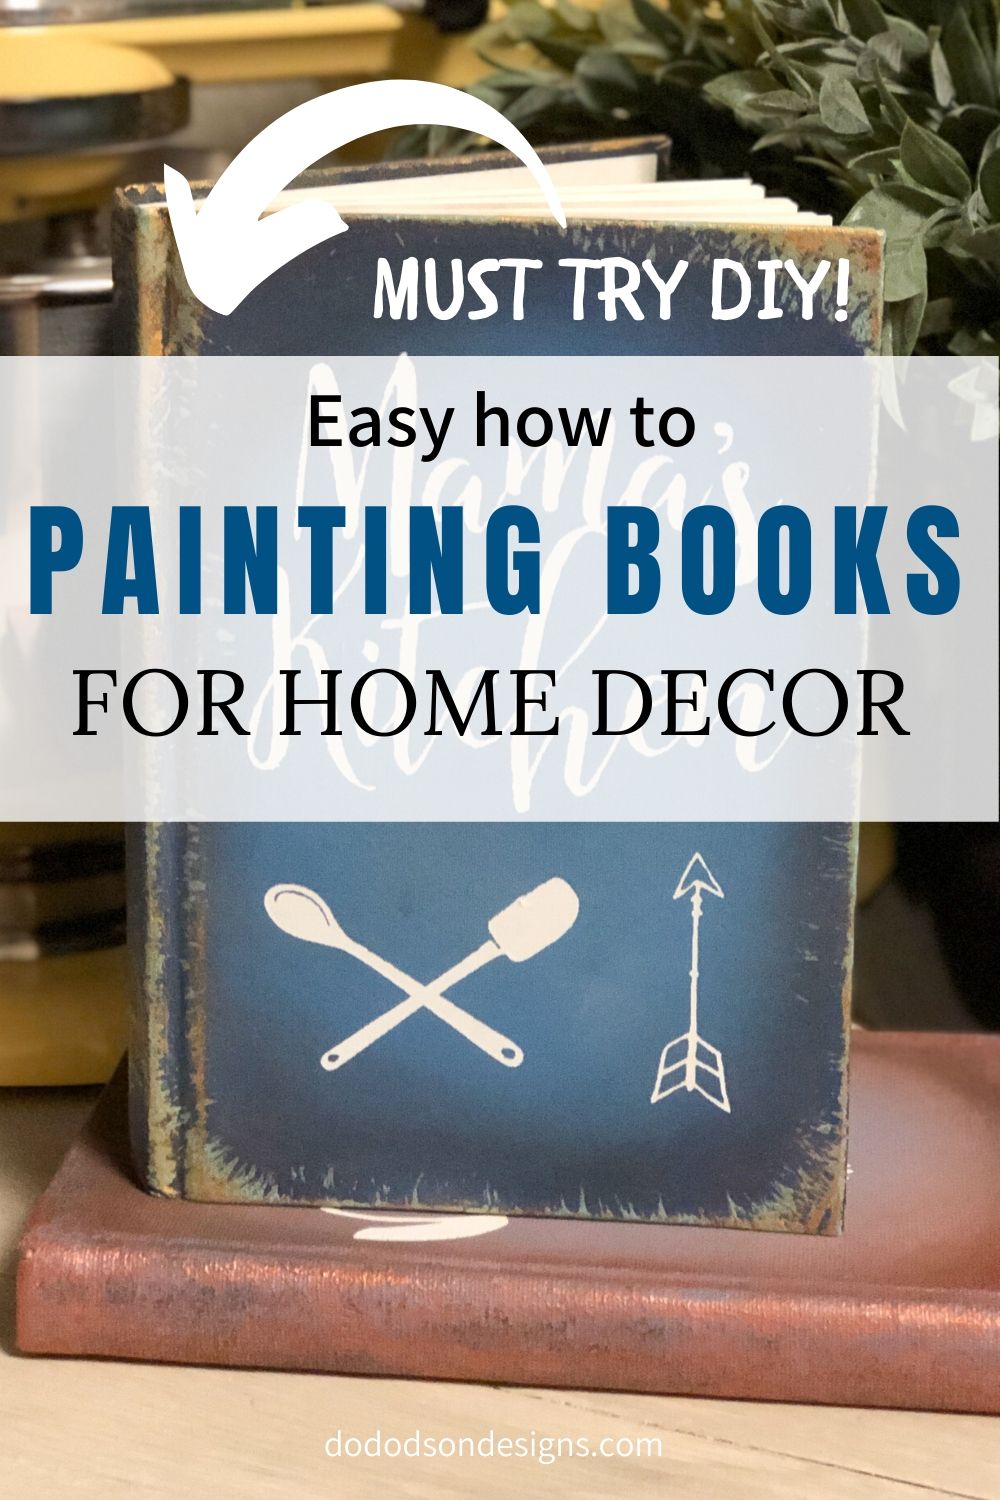 How To Paint Books For Decor | Decorative Books